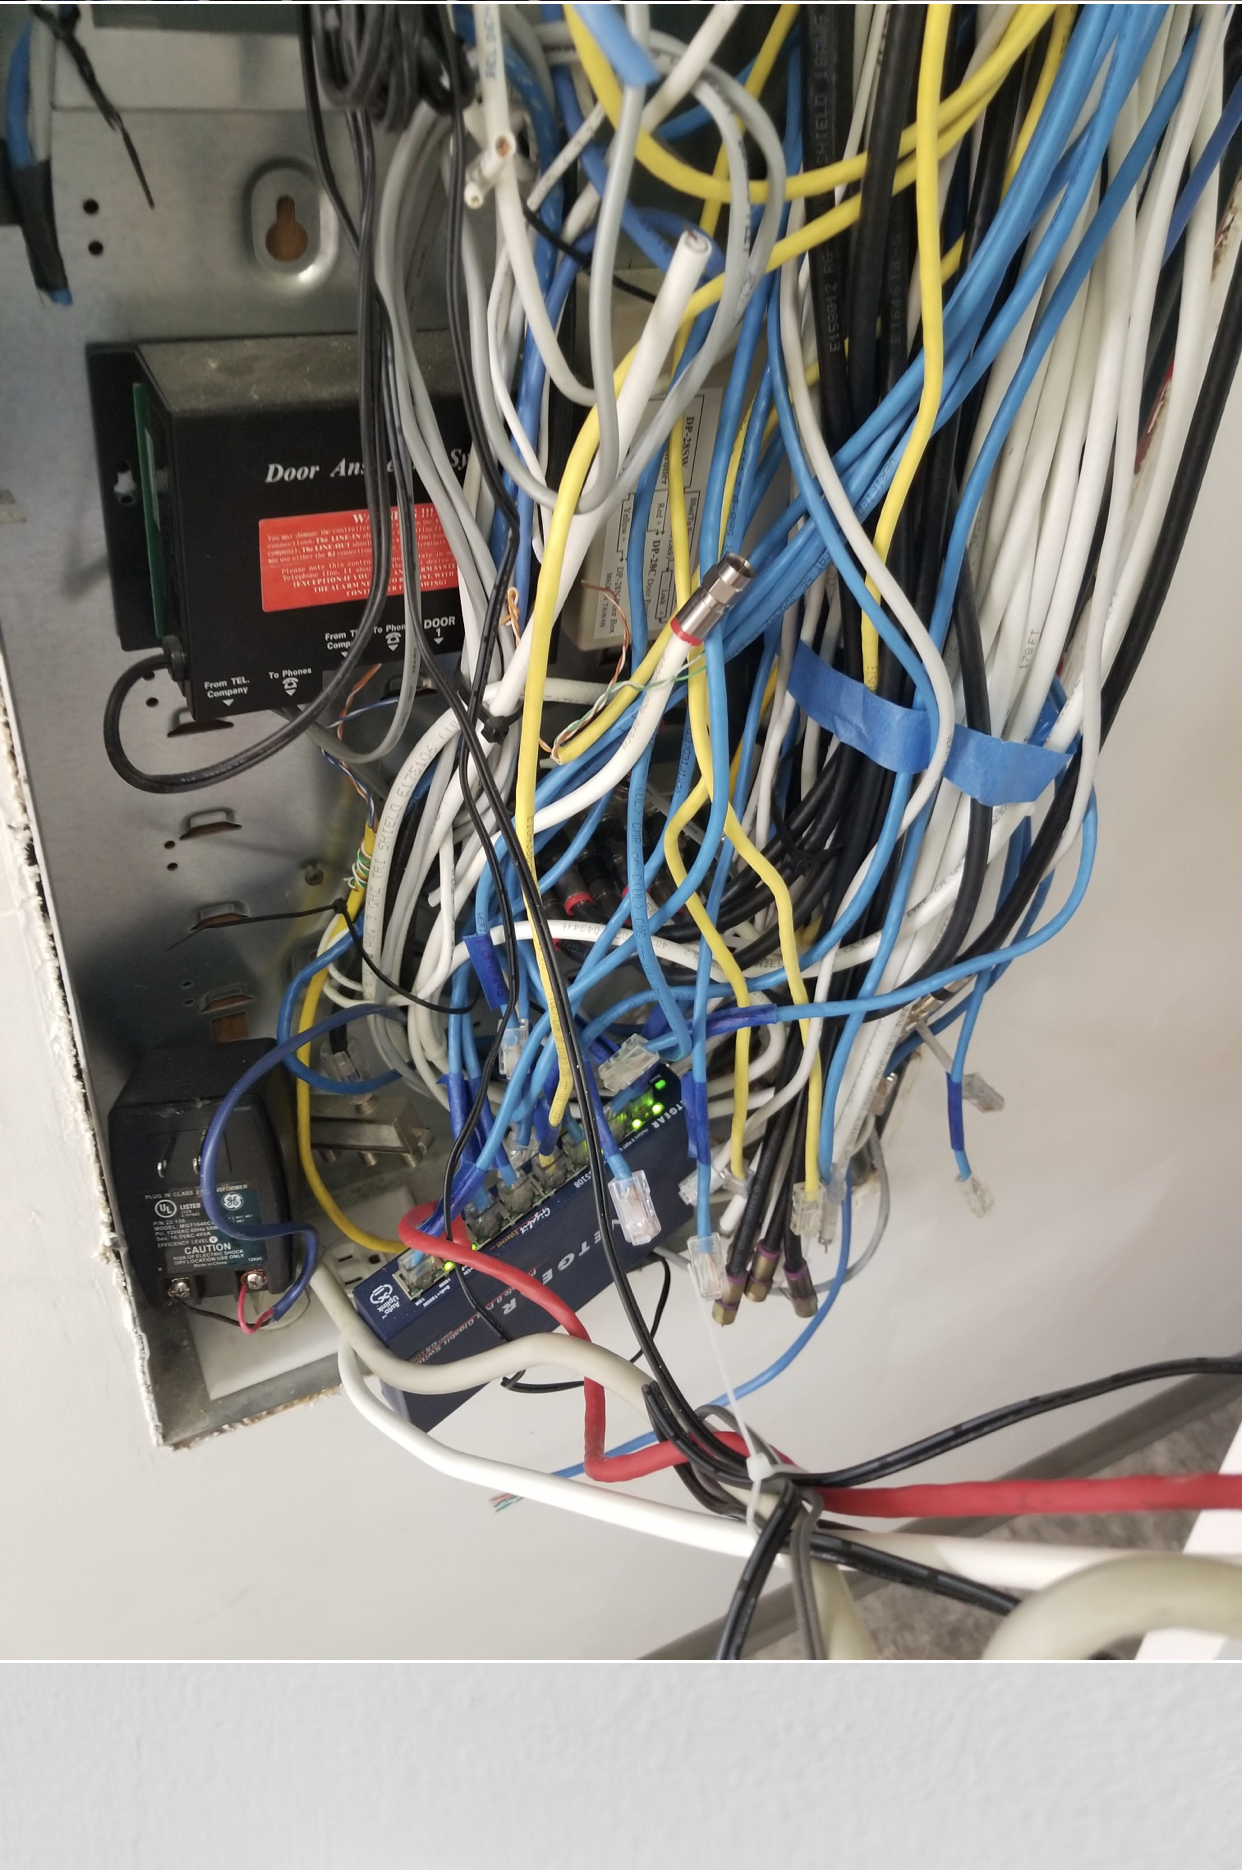 Messy wiring exposed outside of enclosure.